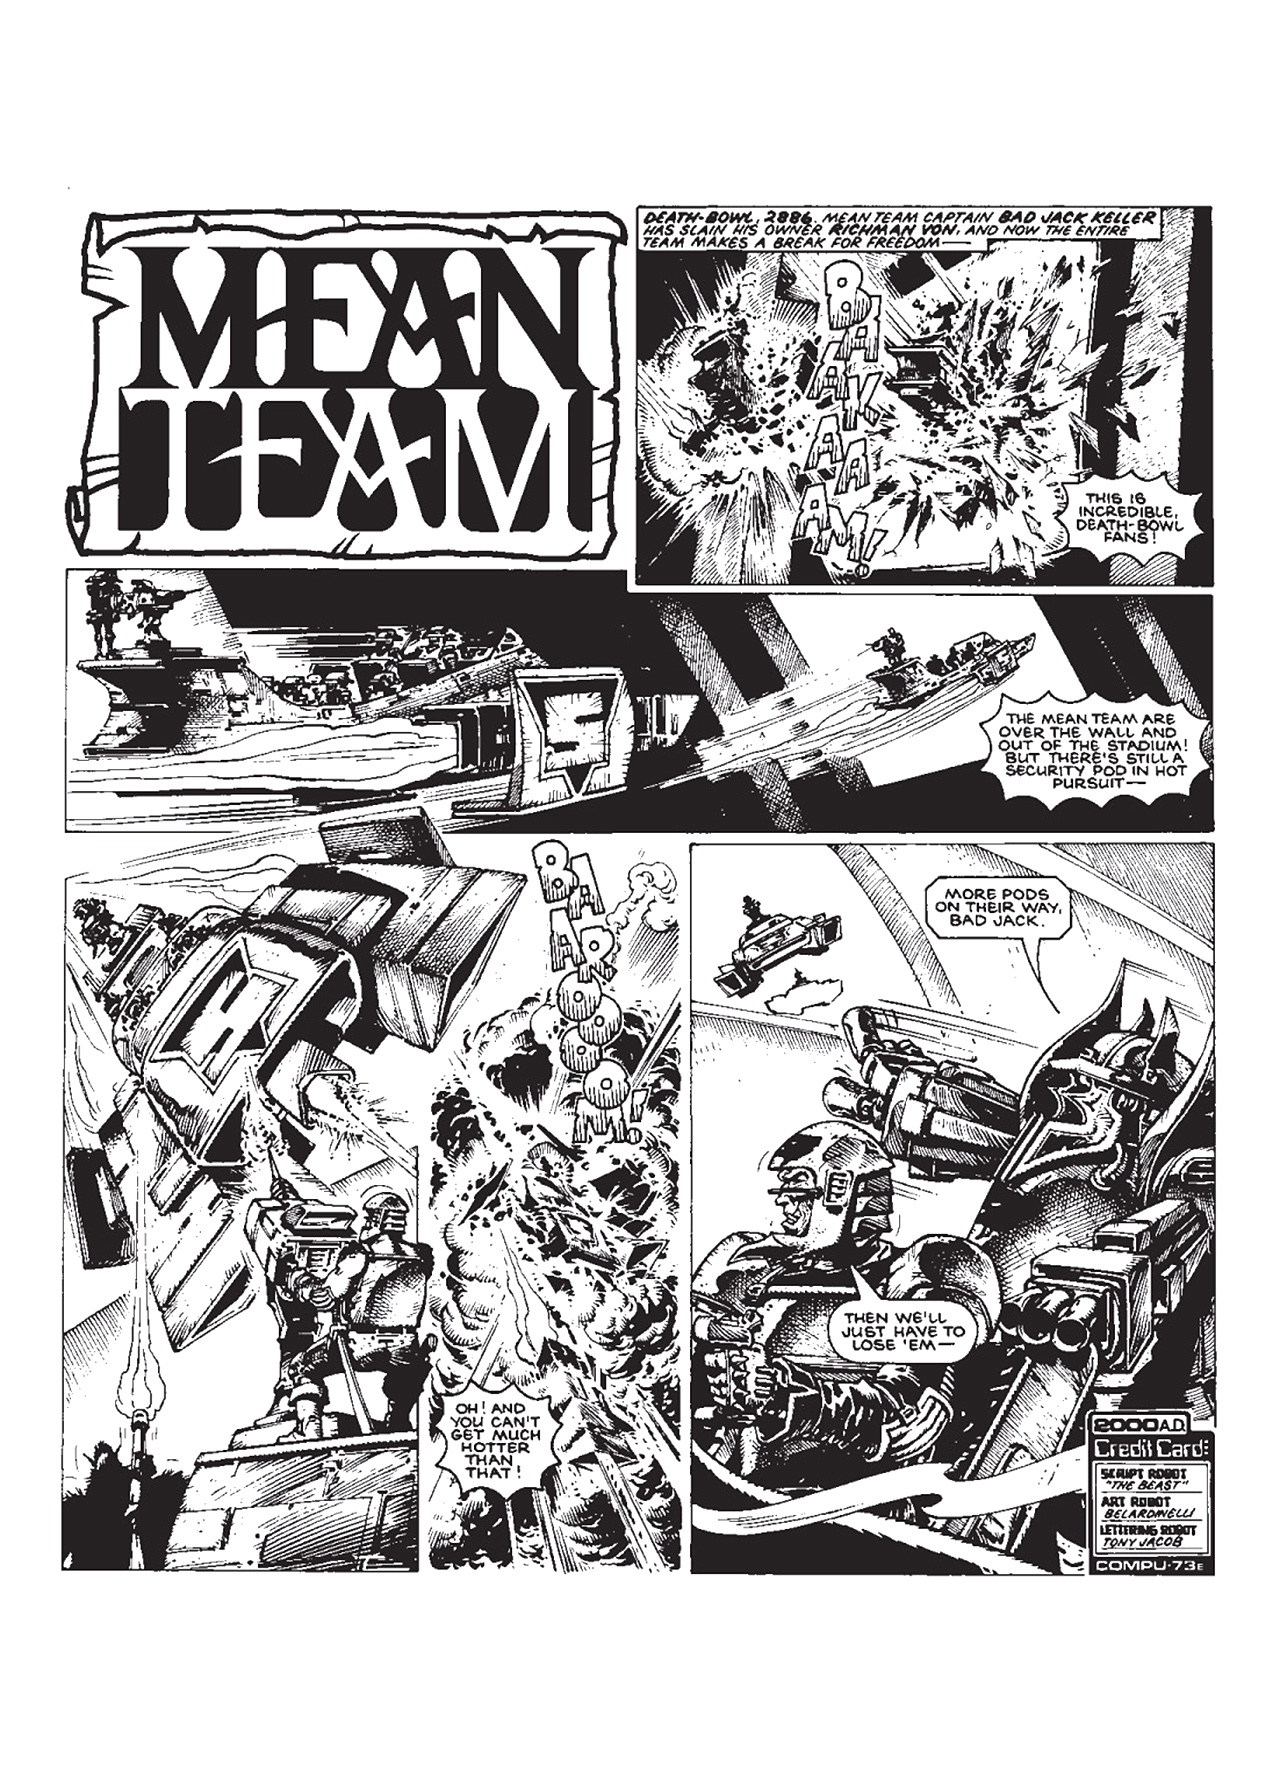 Read online Mean Team comic -  Issue # TPB - 97